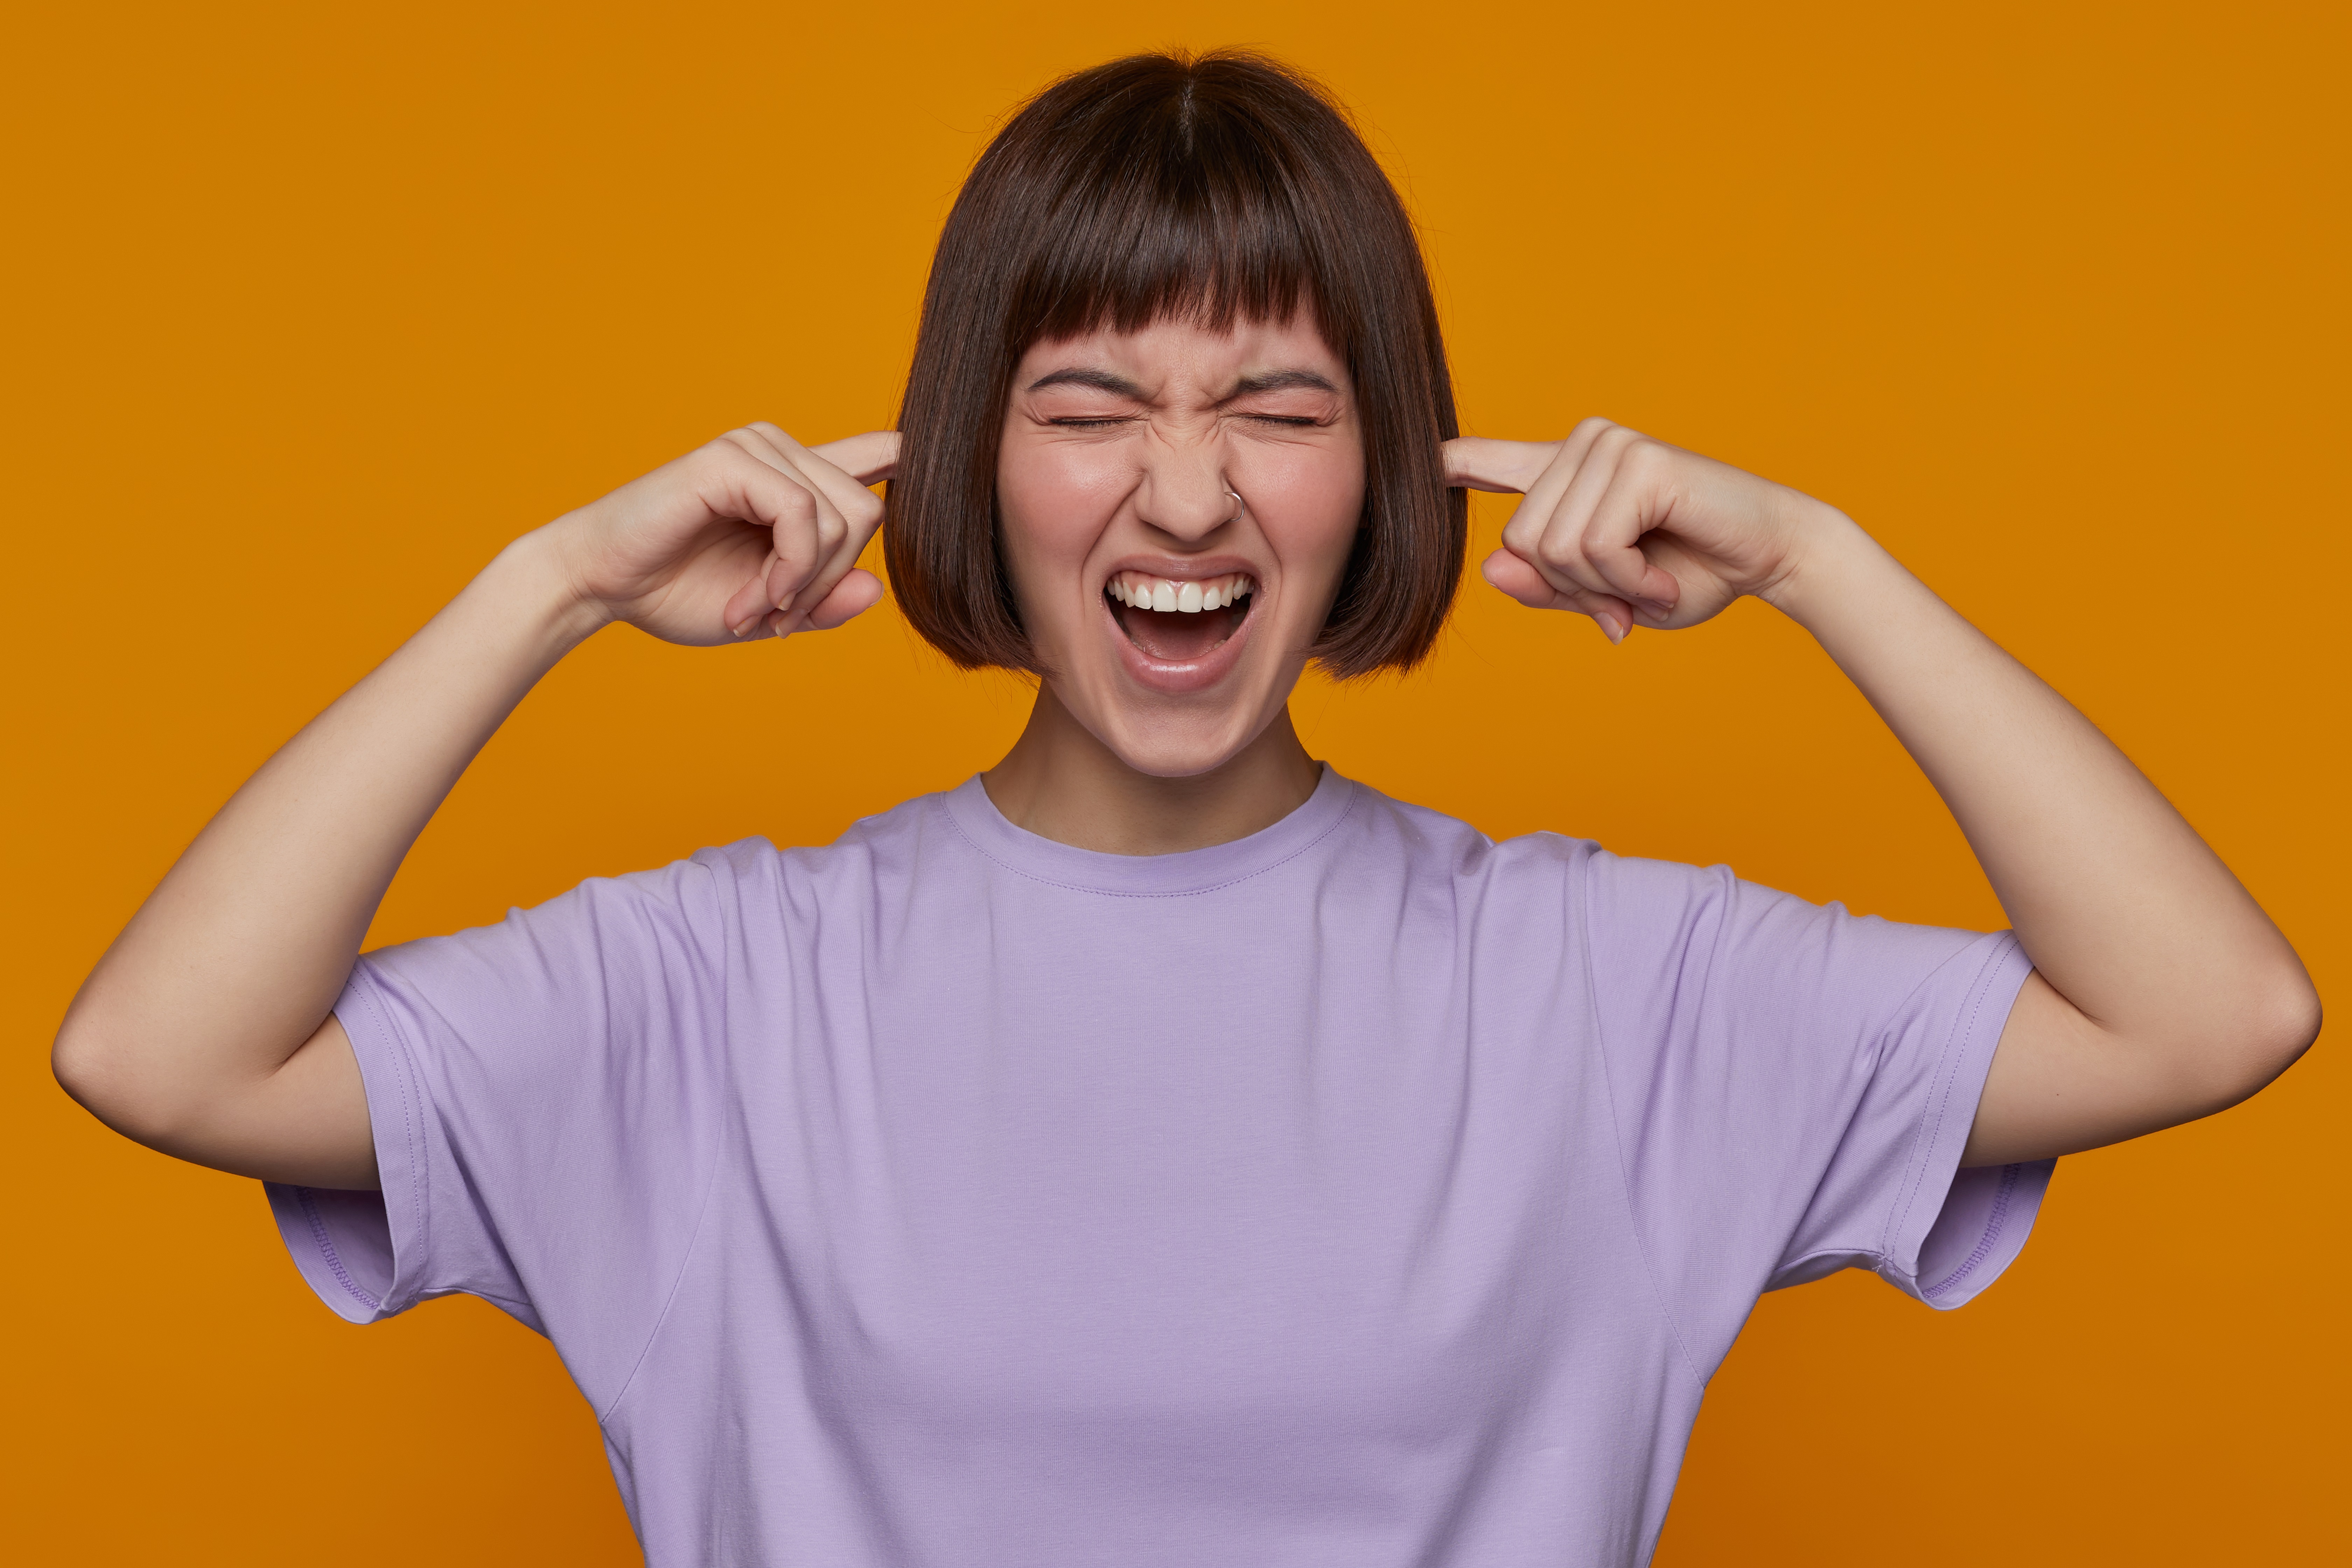 indoor-portrait-of-young-female-posing-over-orange-background-plug-her-ears-with-fingers-stressed-and-depressed.jpg